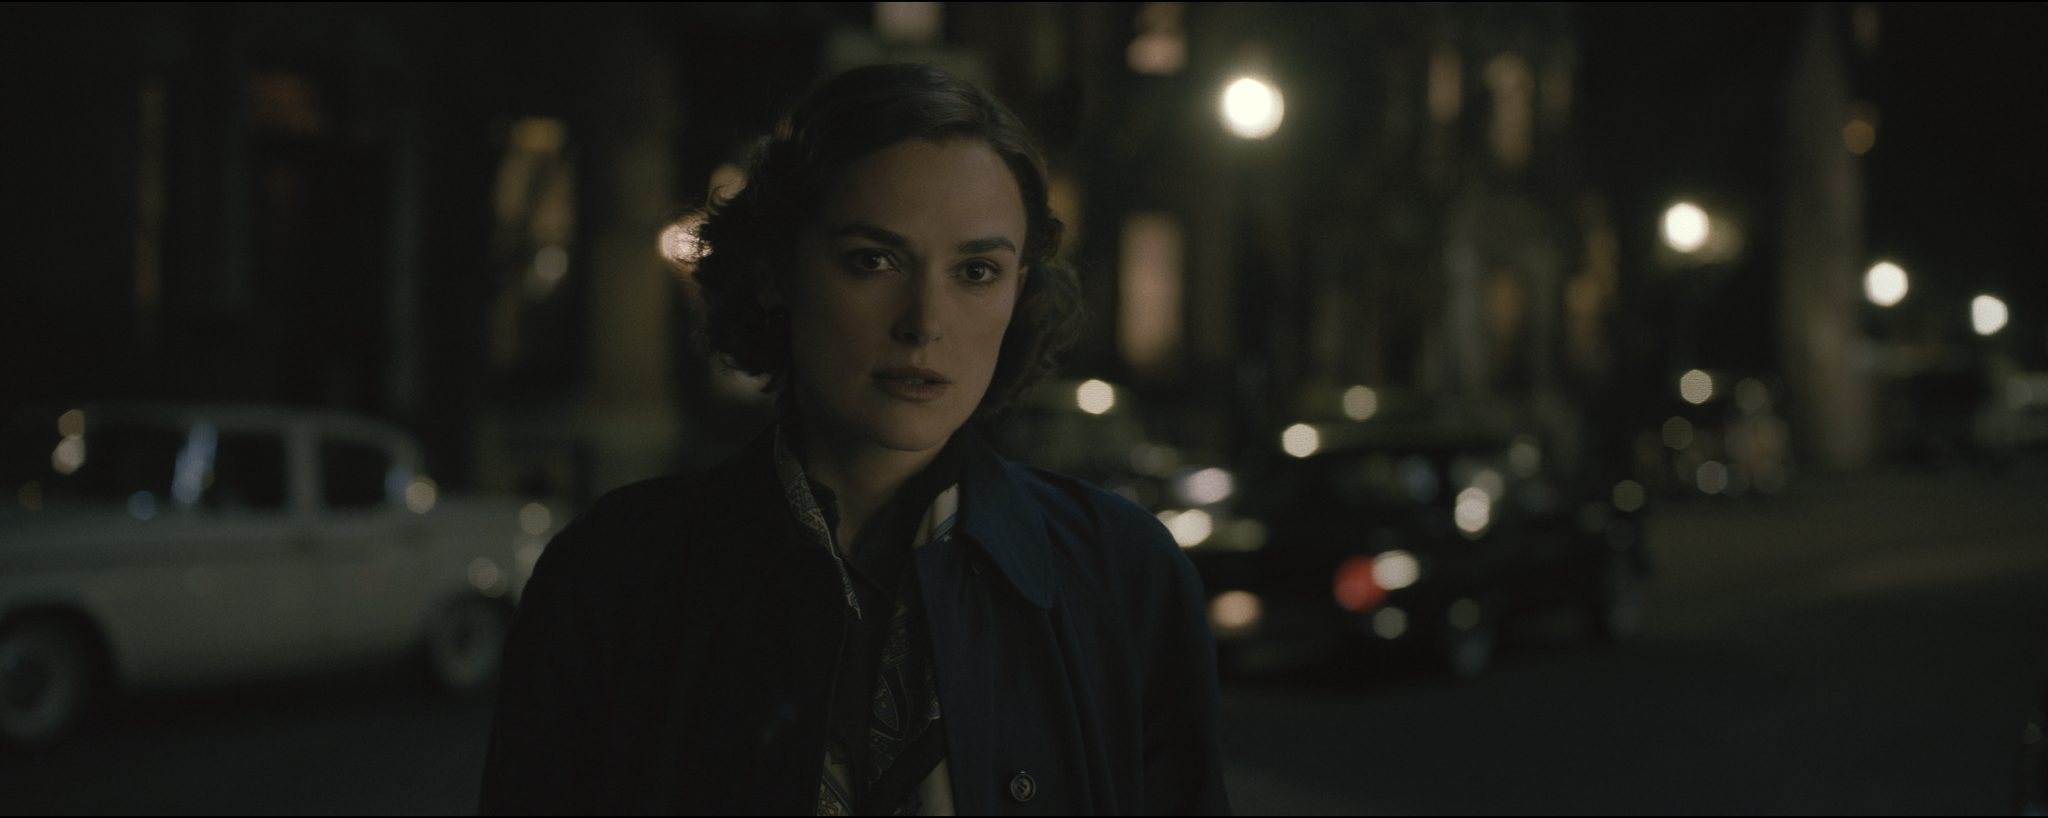 Boston Strangler Keira Knightley and Carrie Coon’s True Crime Movie